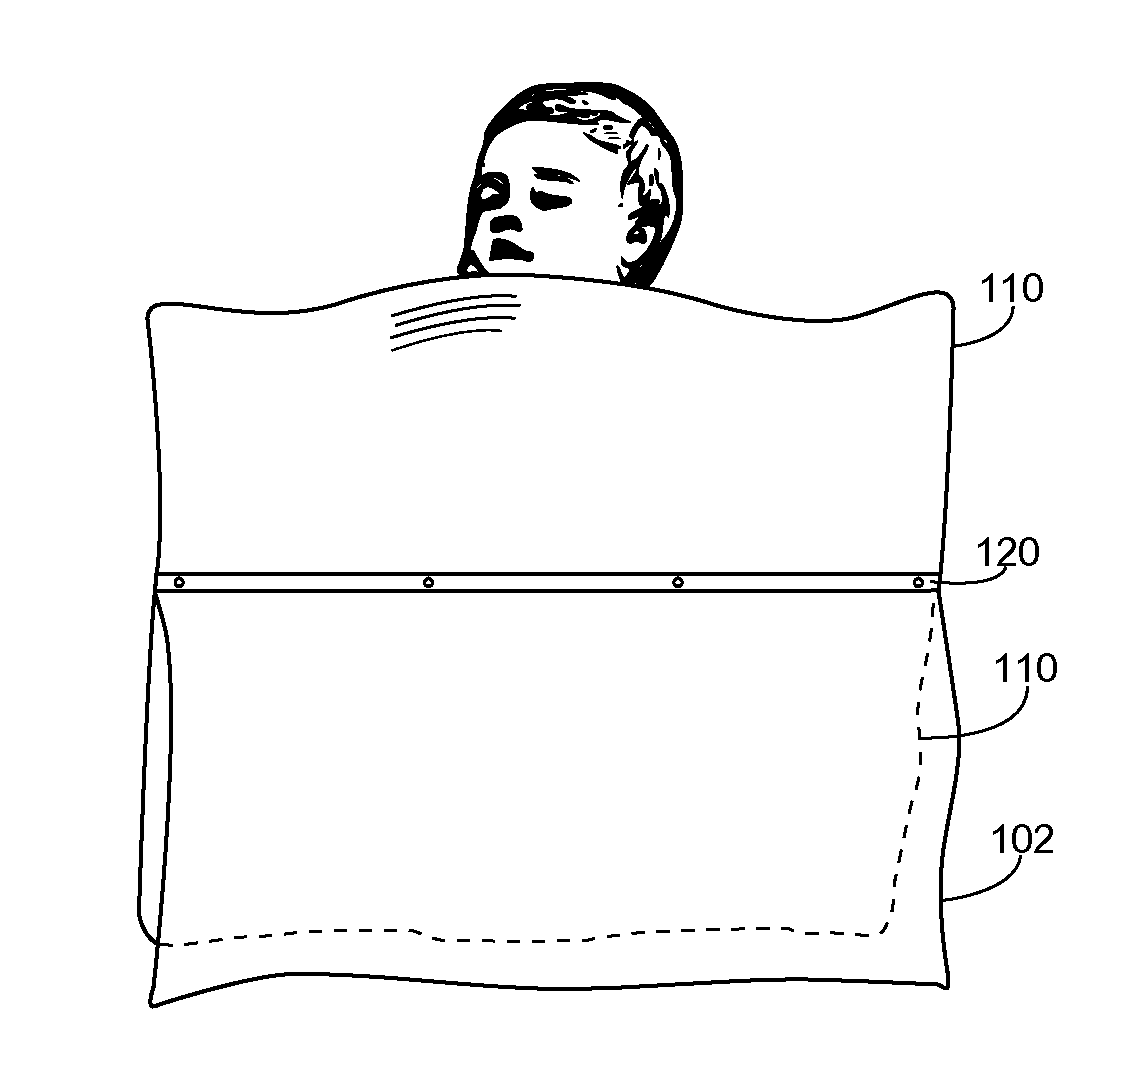 Blanket, sleeping bag and other bedding materials with rotatable second layer for covering exposed portion of user after user has fallen asleep